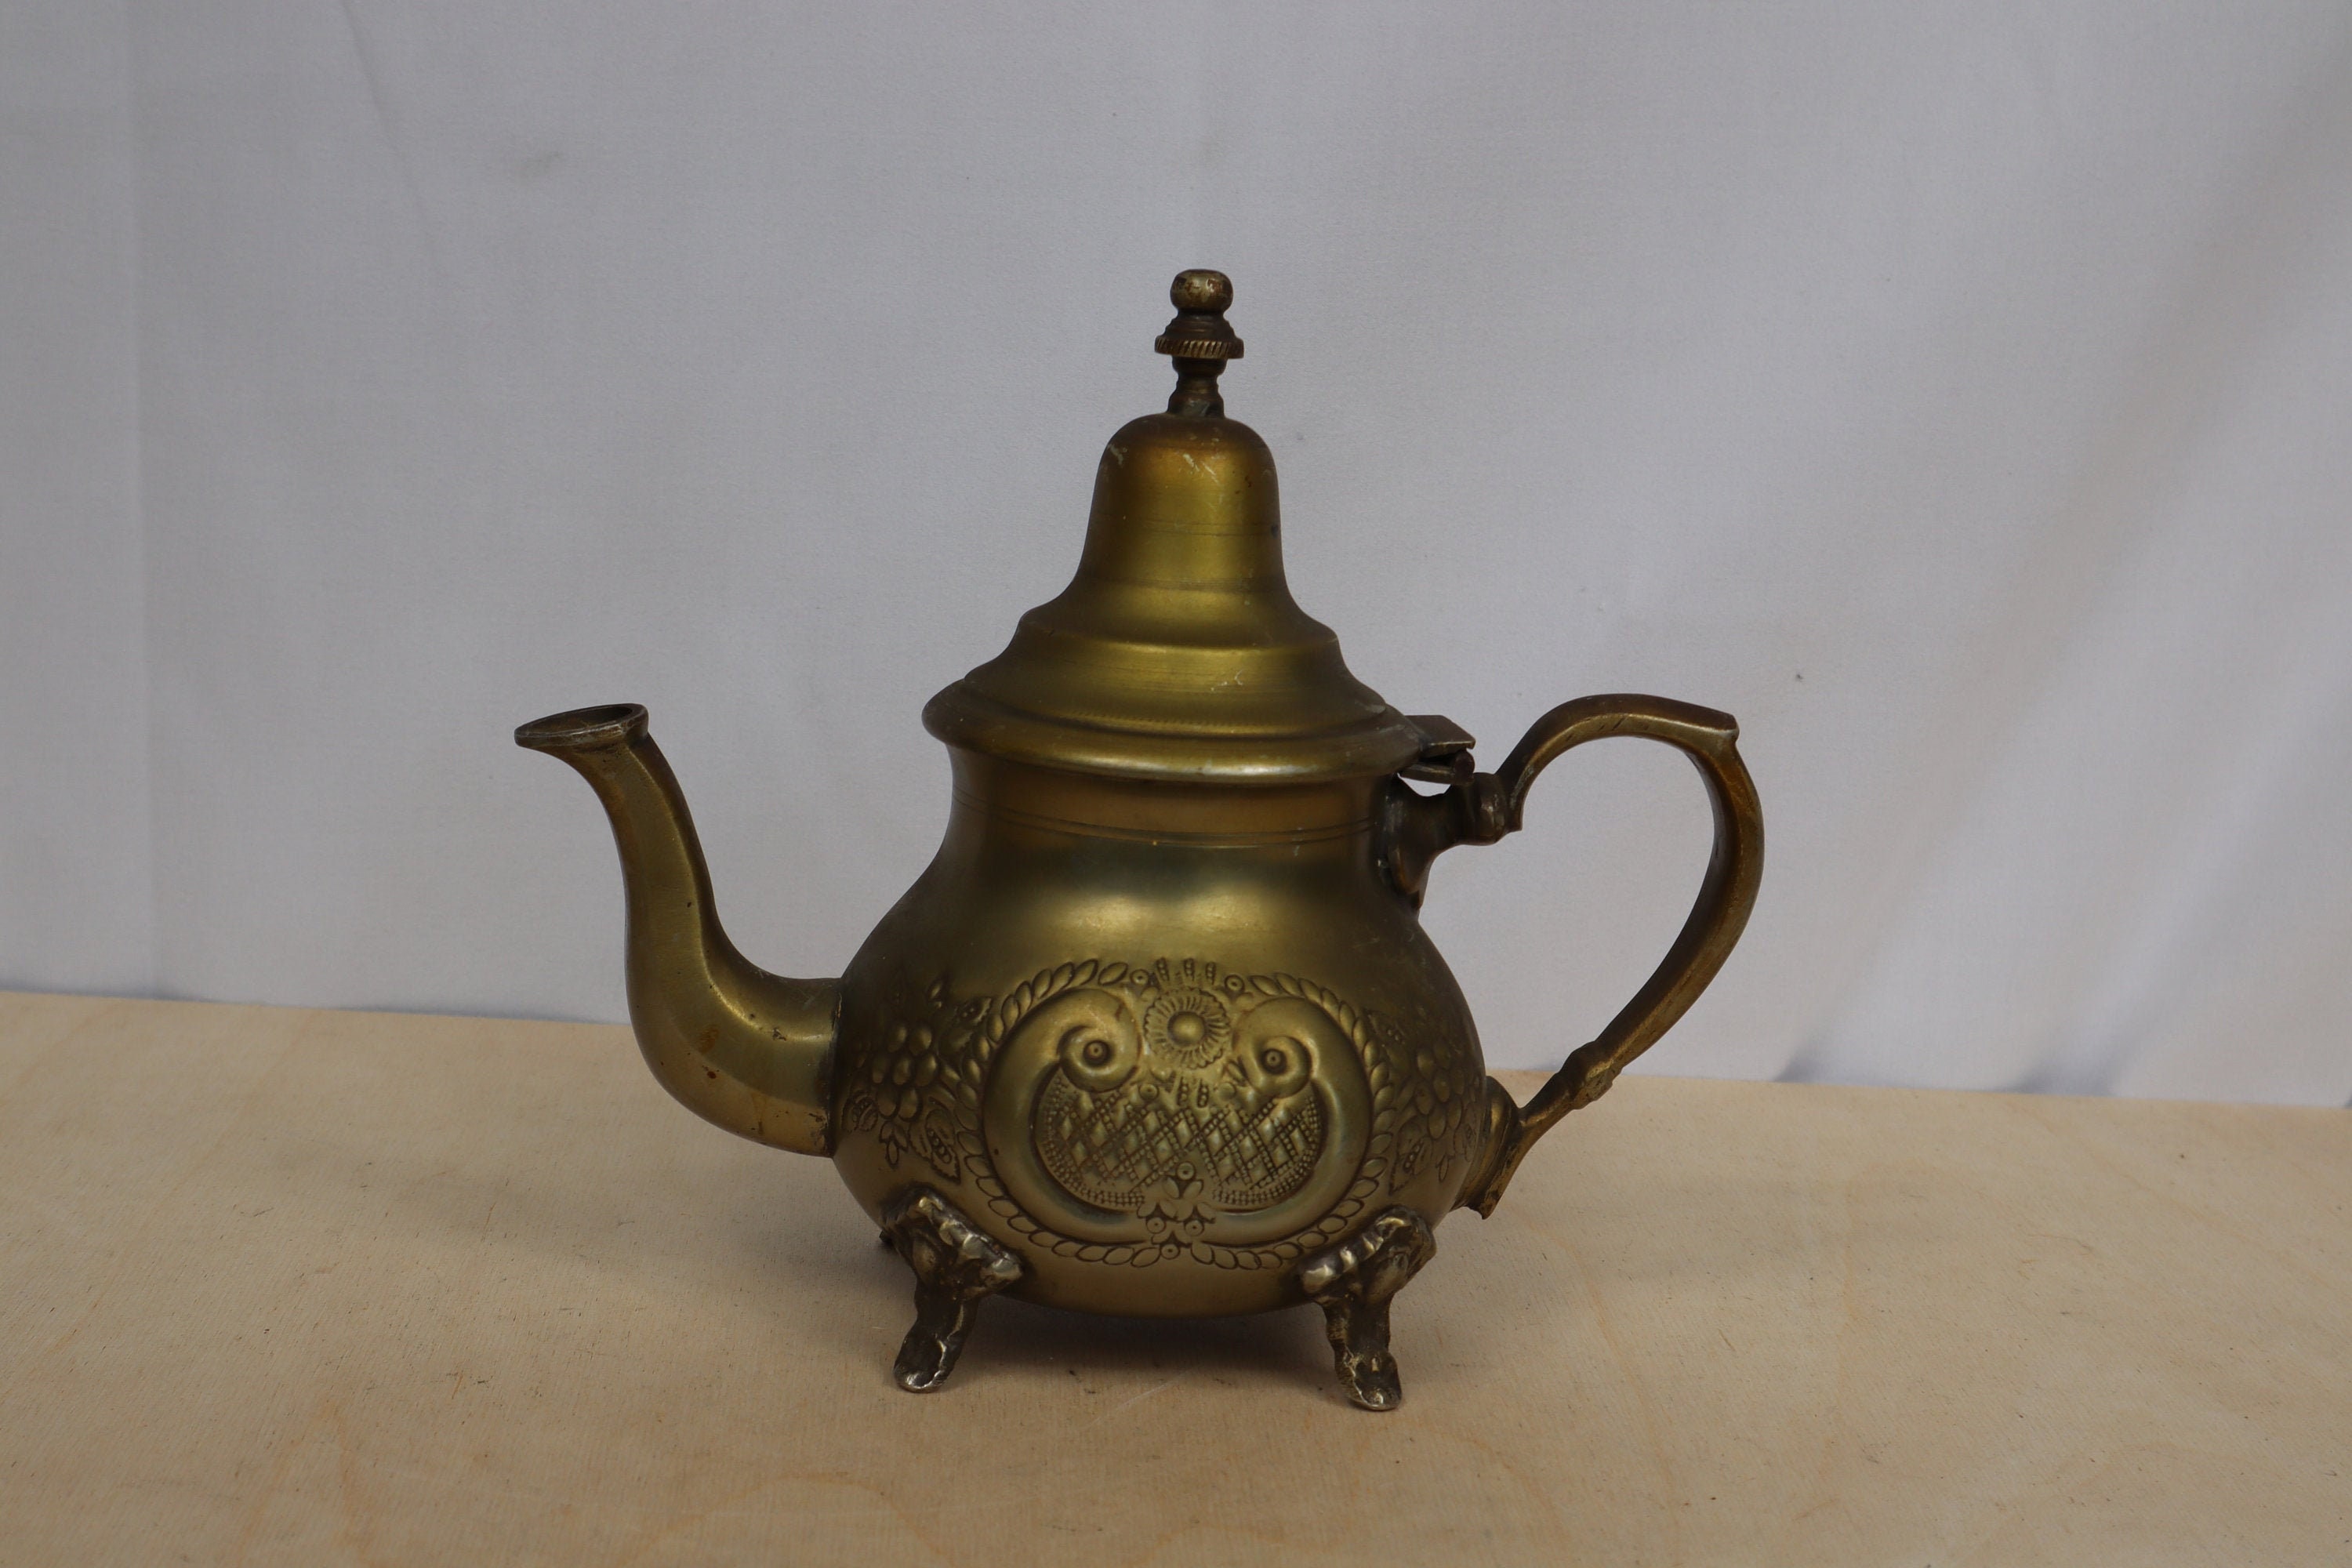 Tibetan Brass Teapot with Antique Finish, 4 inches